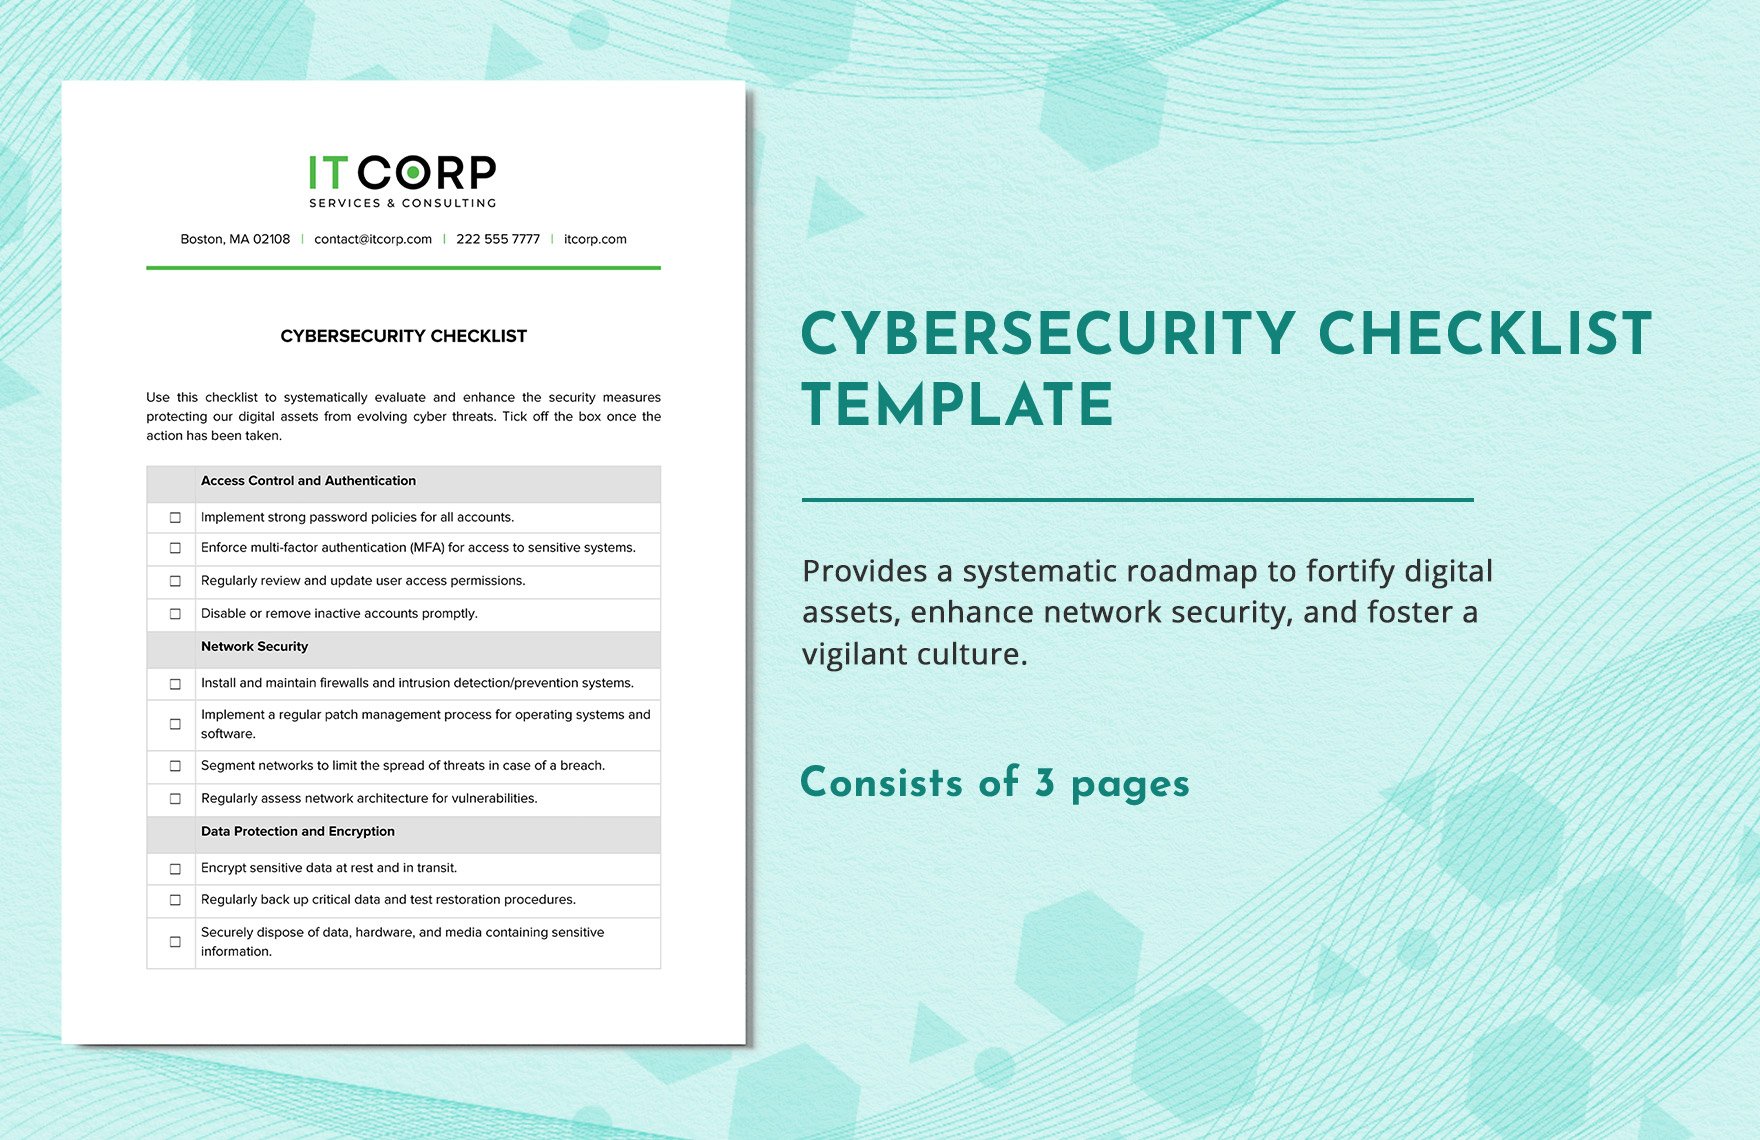 Cybersecurity Checklist Template in Word, Google Docs, PDF